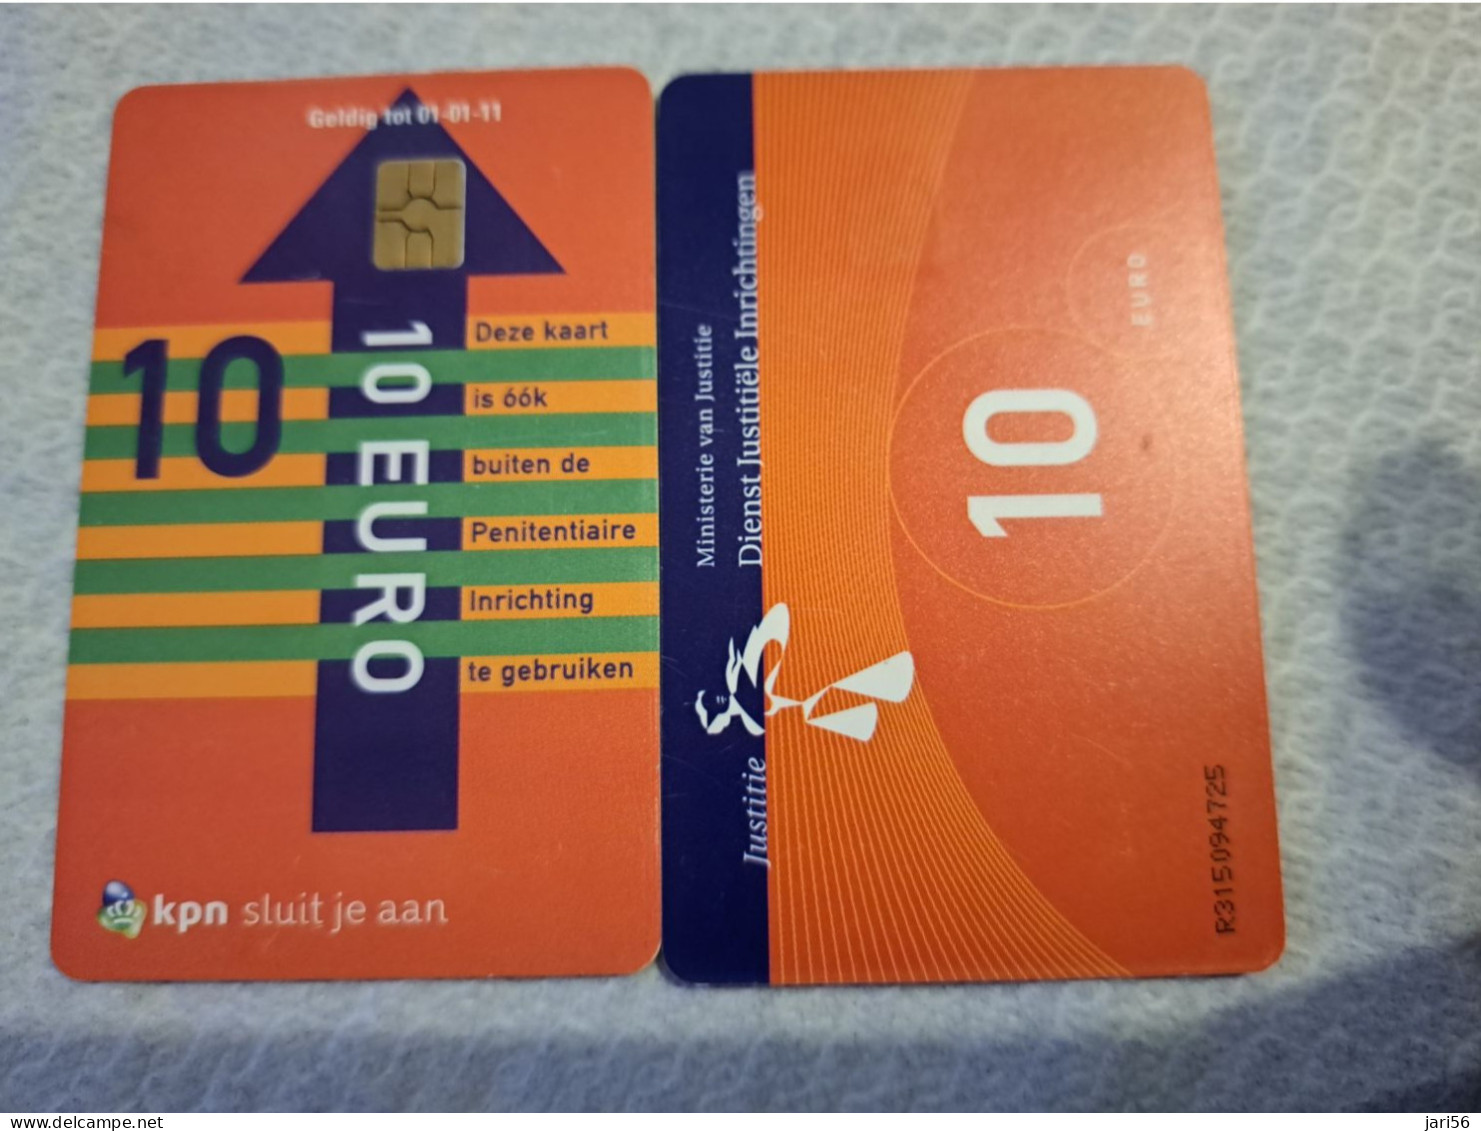 NETHERLANDS   € 10,-   / USED  / DATE  01-01-11  JUSTITIE/PRISON CARD  CHIP CARD/ USED   ** 16164** - Schede GSM, Prepagate E Ricariche